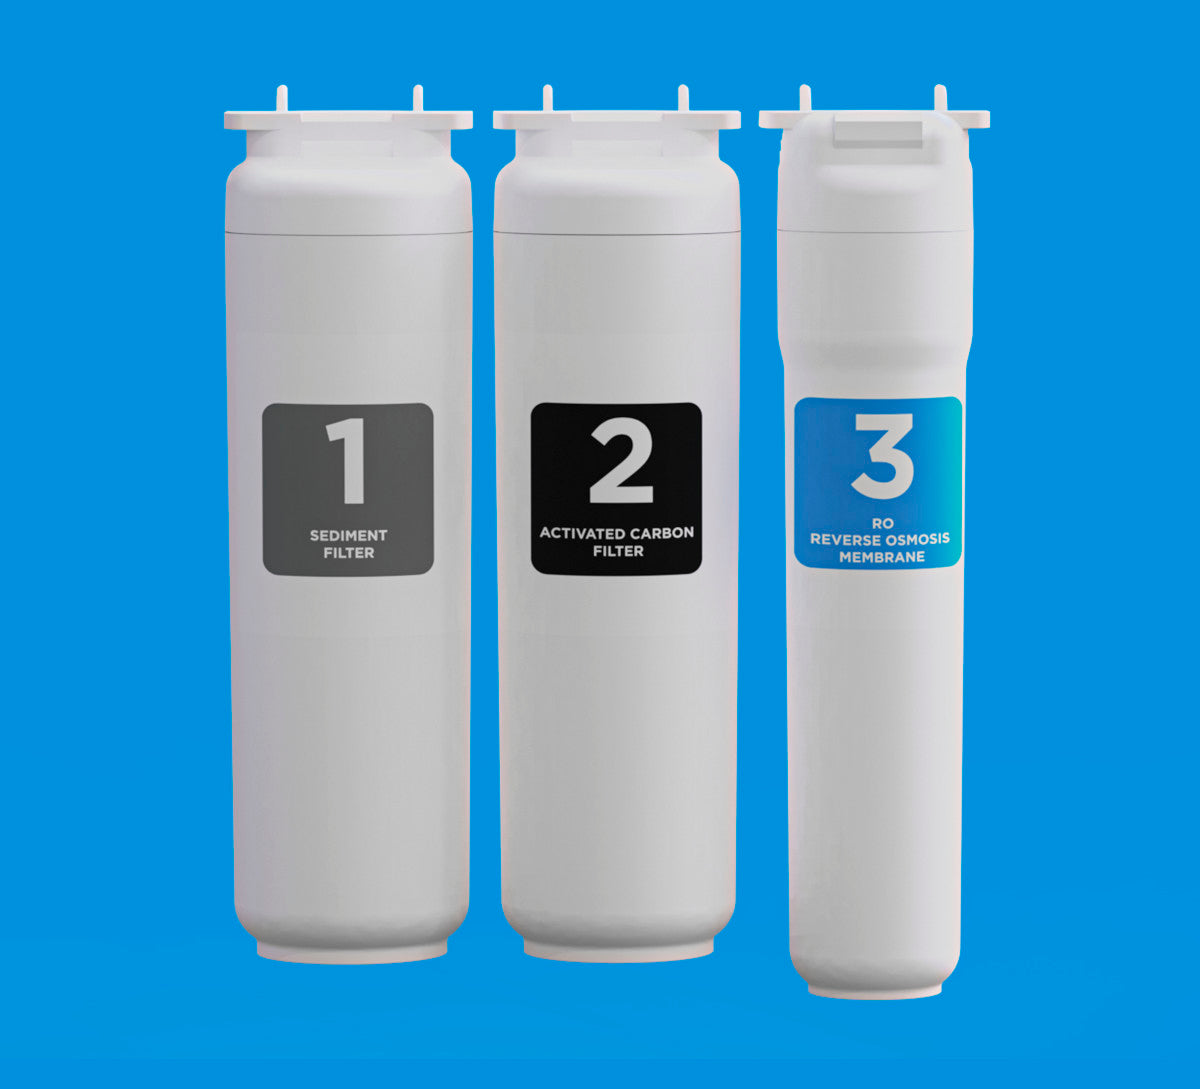 Drinking water filters